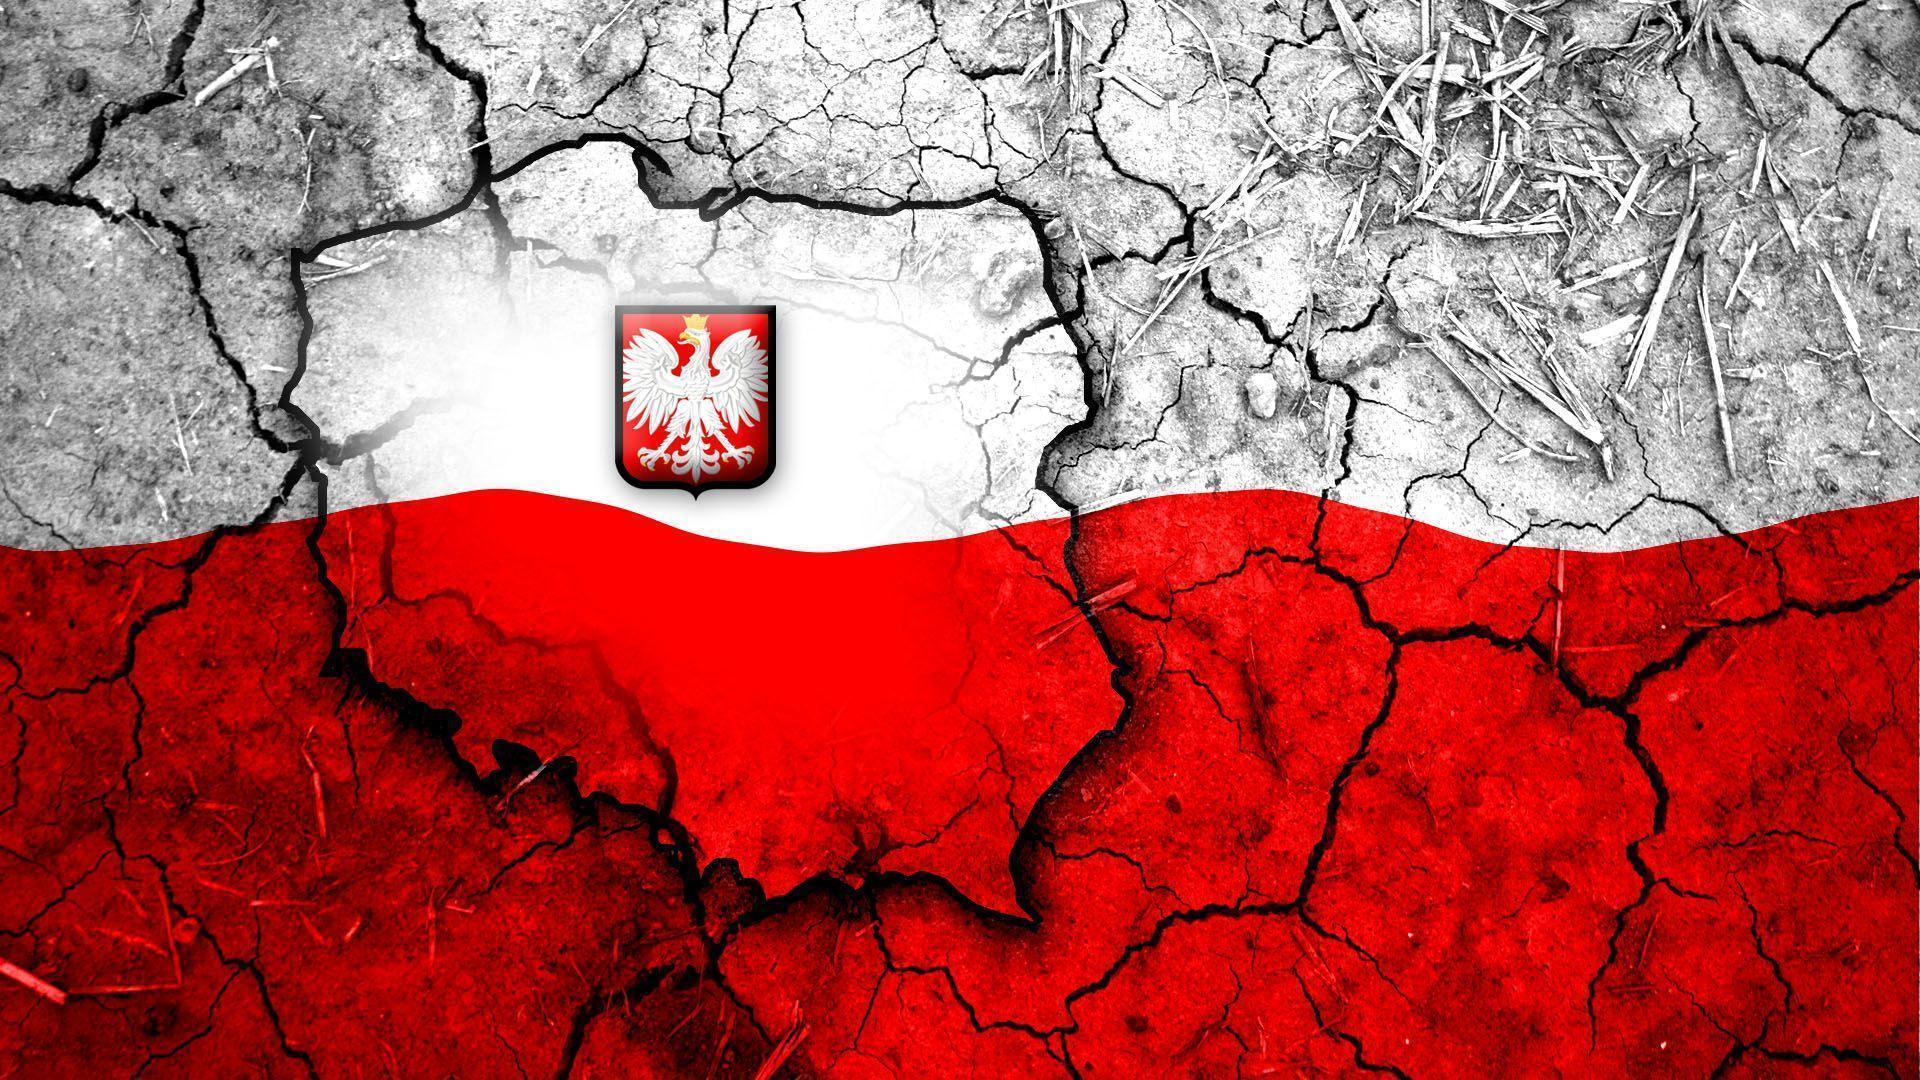 Poland Wallpaper for Free Download, 41 Poland Full HD Wallpaper